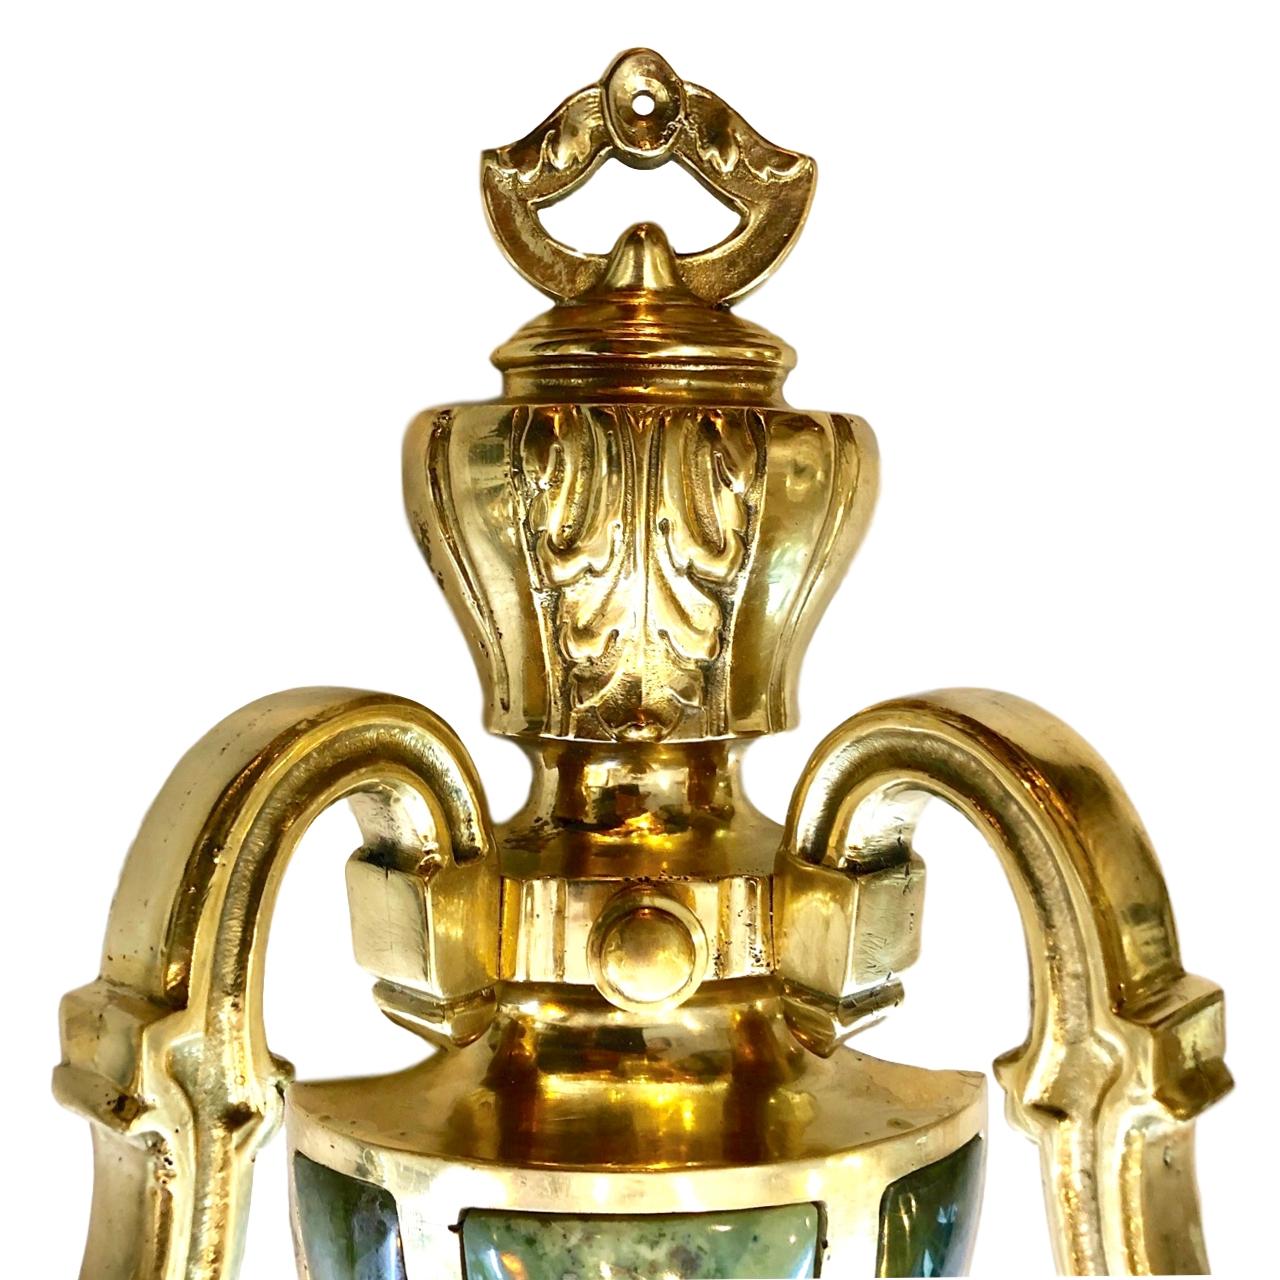 Bronze Gilt Sconces with Jadeite Stone Insets, Sold in Pairs